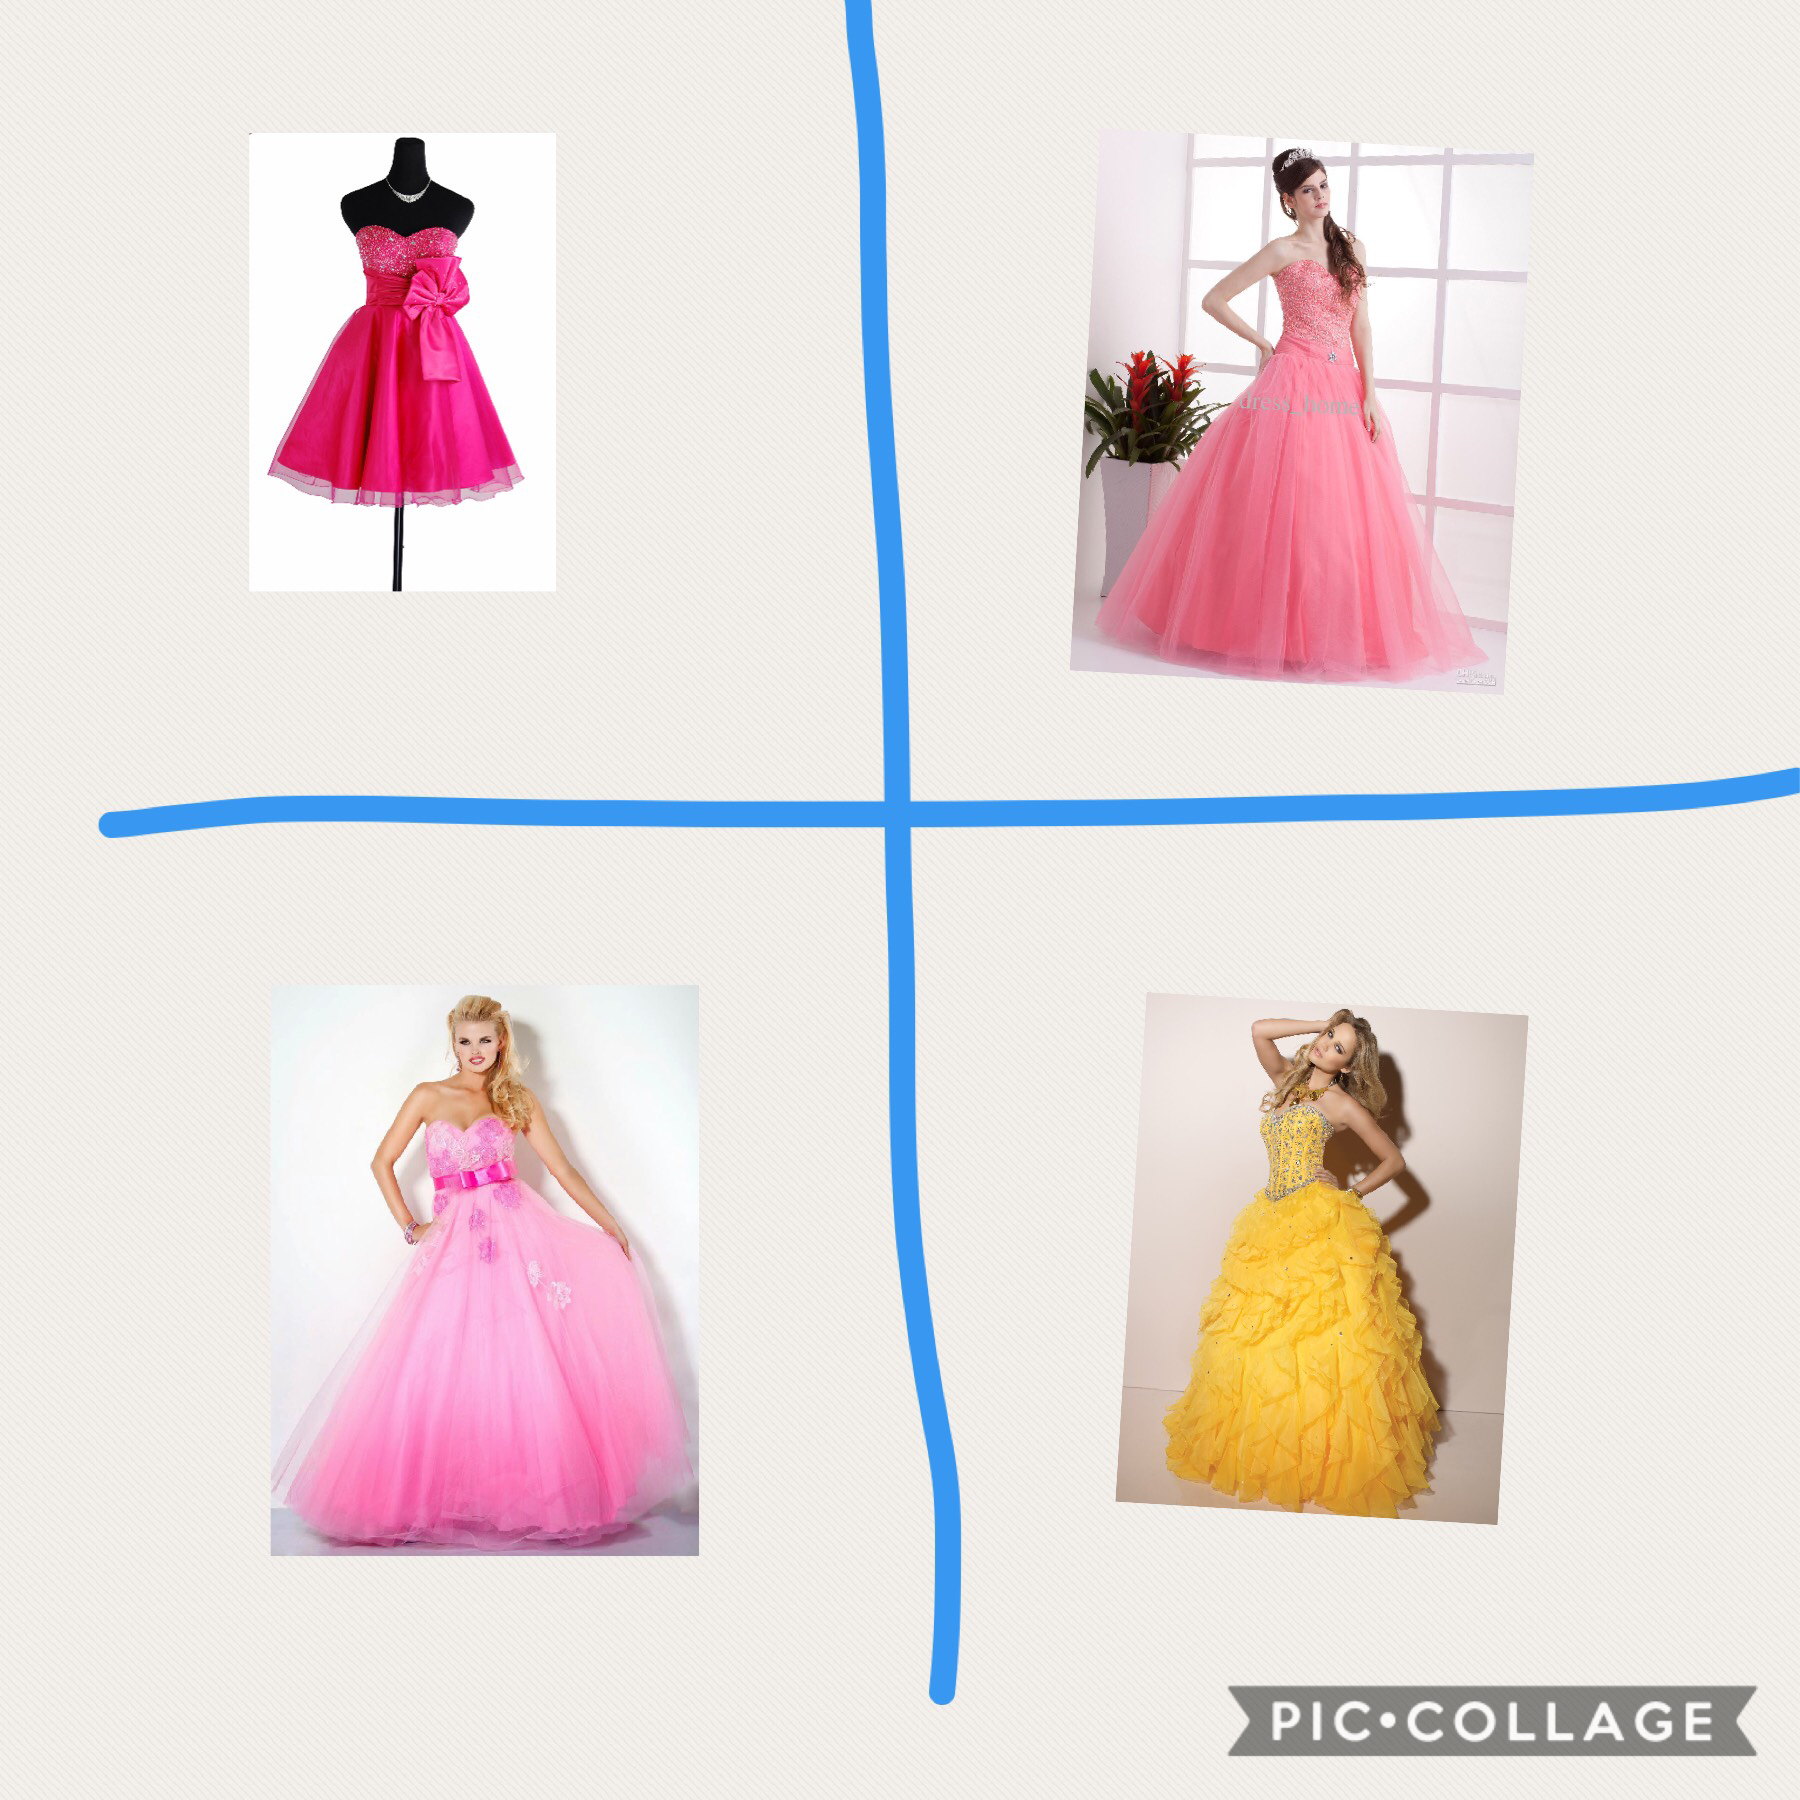 Which dress